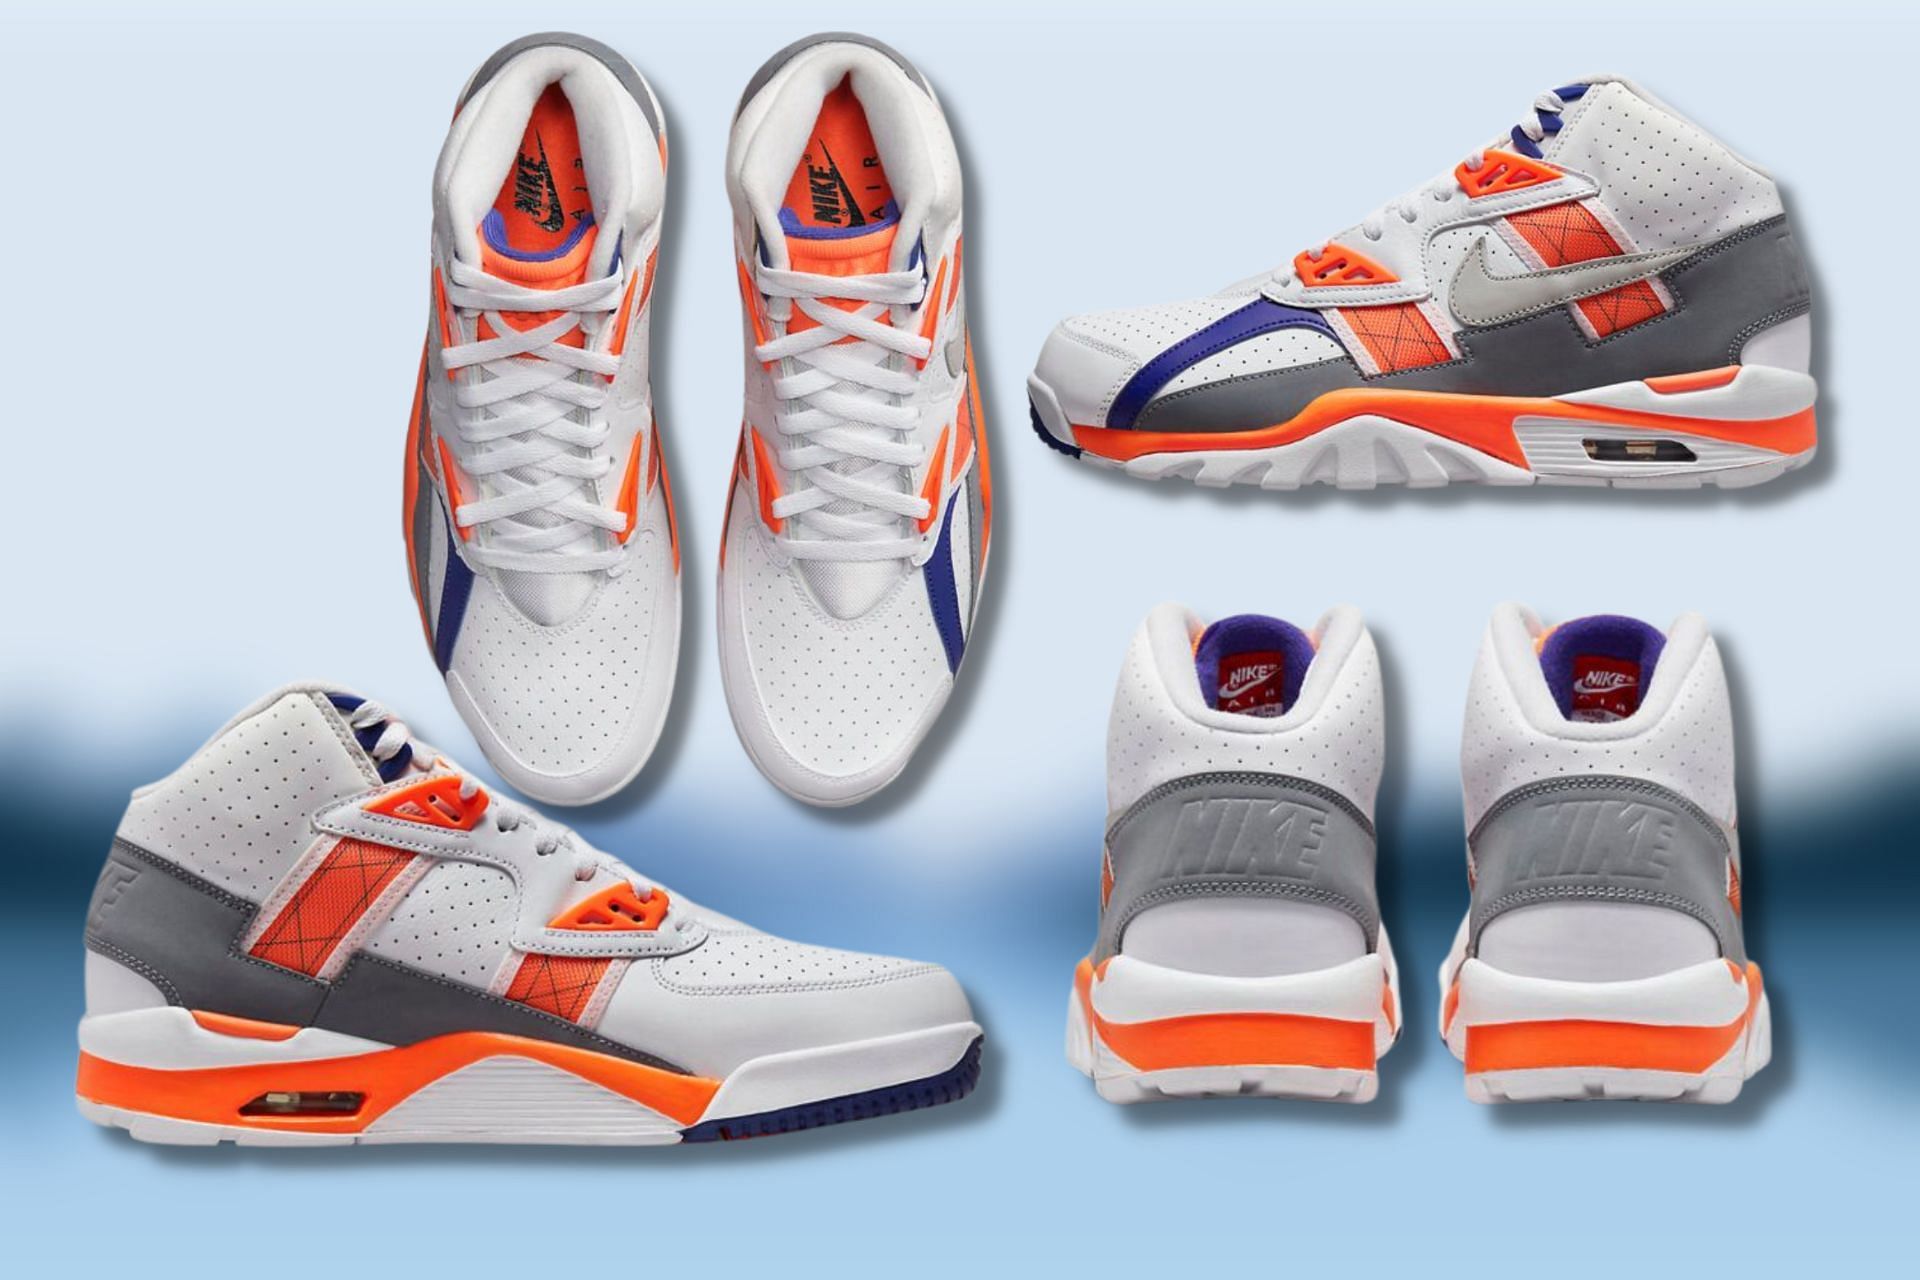 Where to buy Bo Jackson's Nike Air Trainer SC High Price, release and more explored